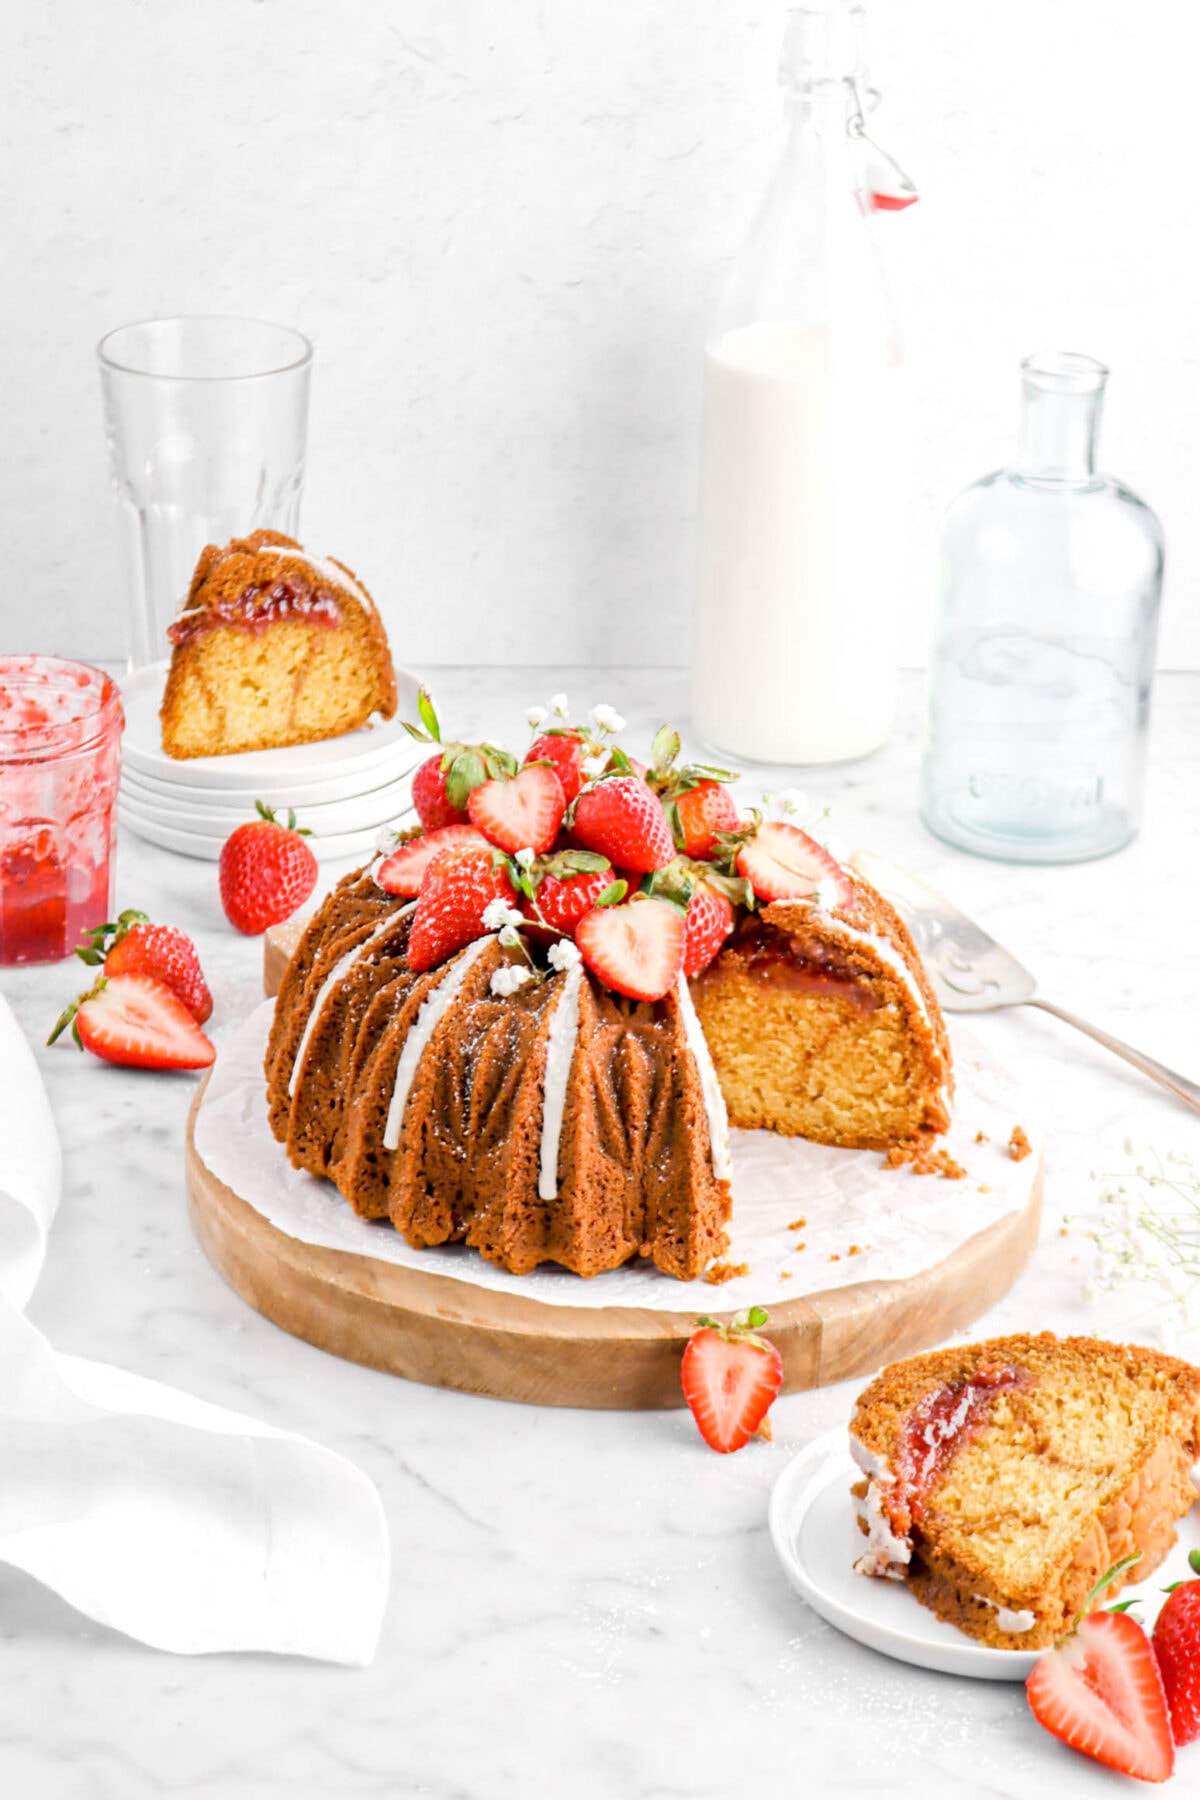 front shot of strawberry swirl bundt cake with slice in front and behind on white plates with empty vase, jug of milk, empty glass, and jam jar behind